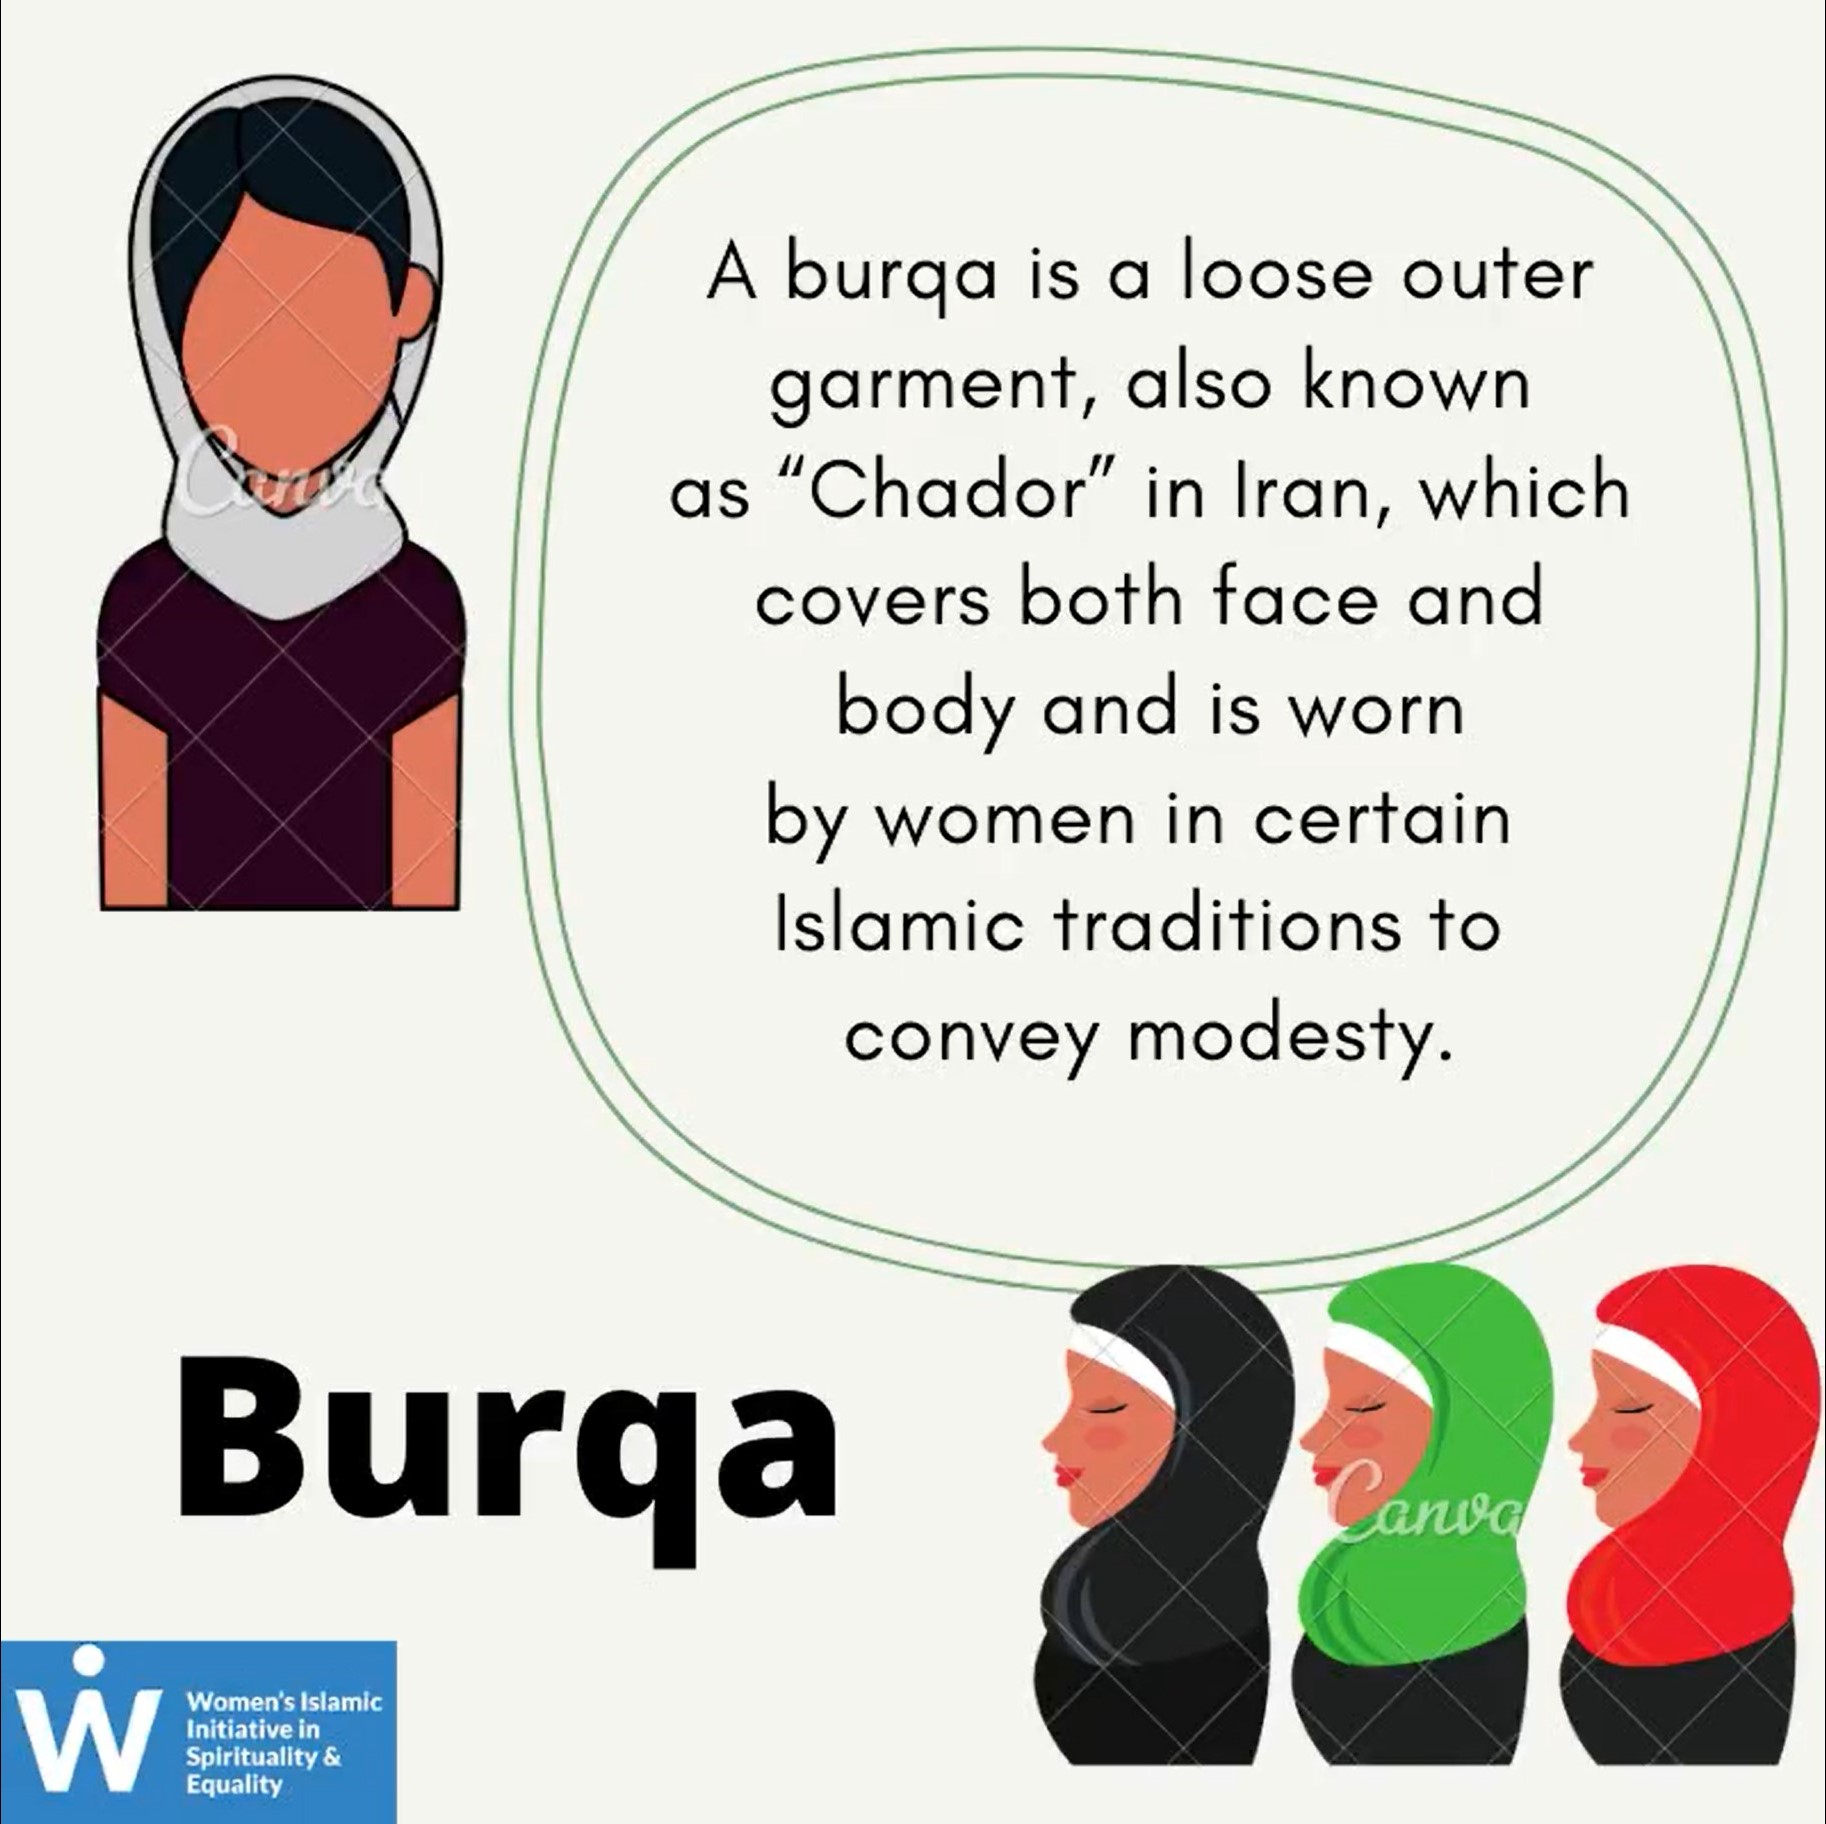 &quot;Burqa: A burqa is a loose outer garment, also known as “Chador” in Iran, which covers both face and body and is worn by women in certain Islamic traditions to convey modesty.&quot;